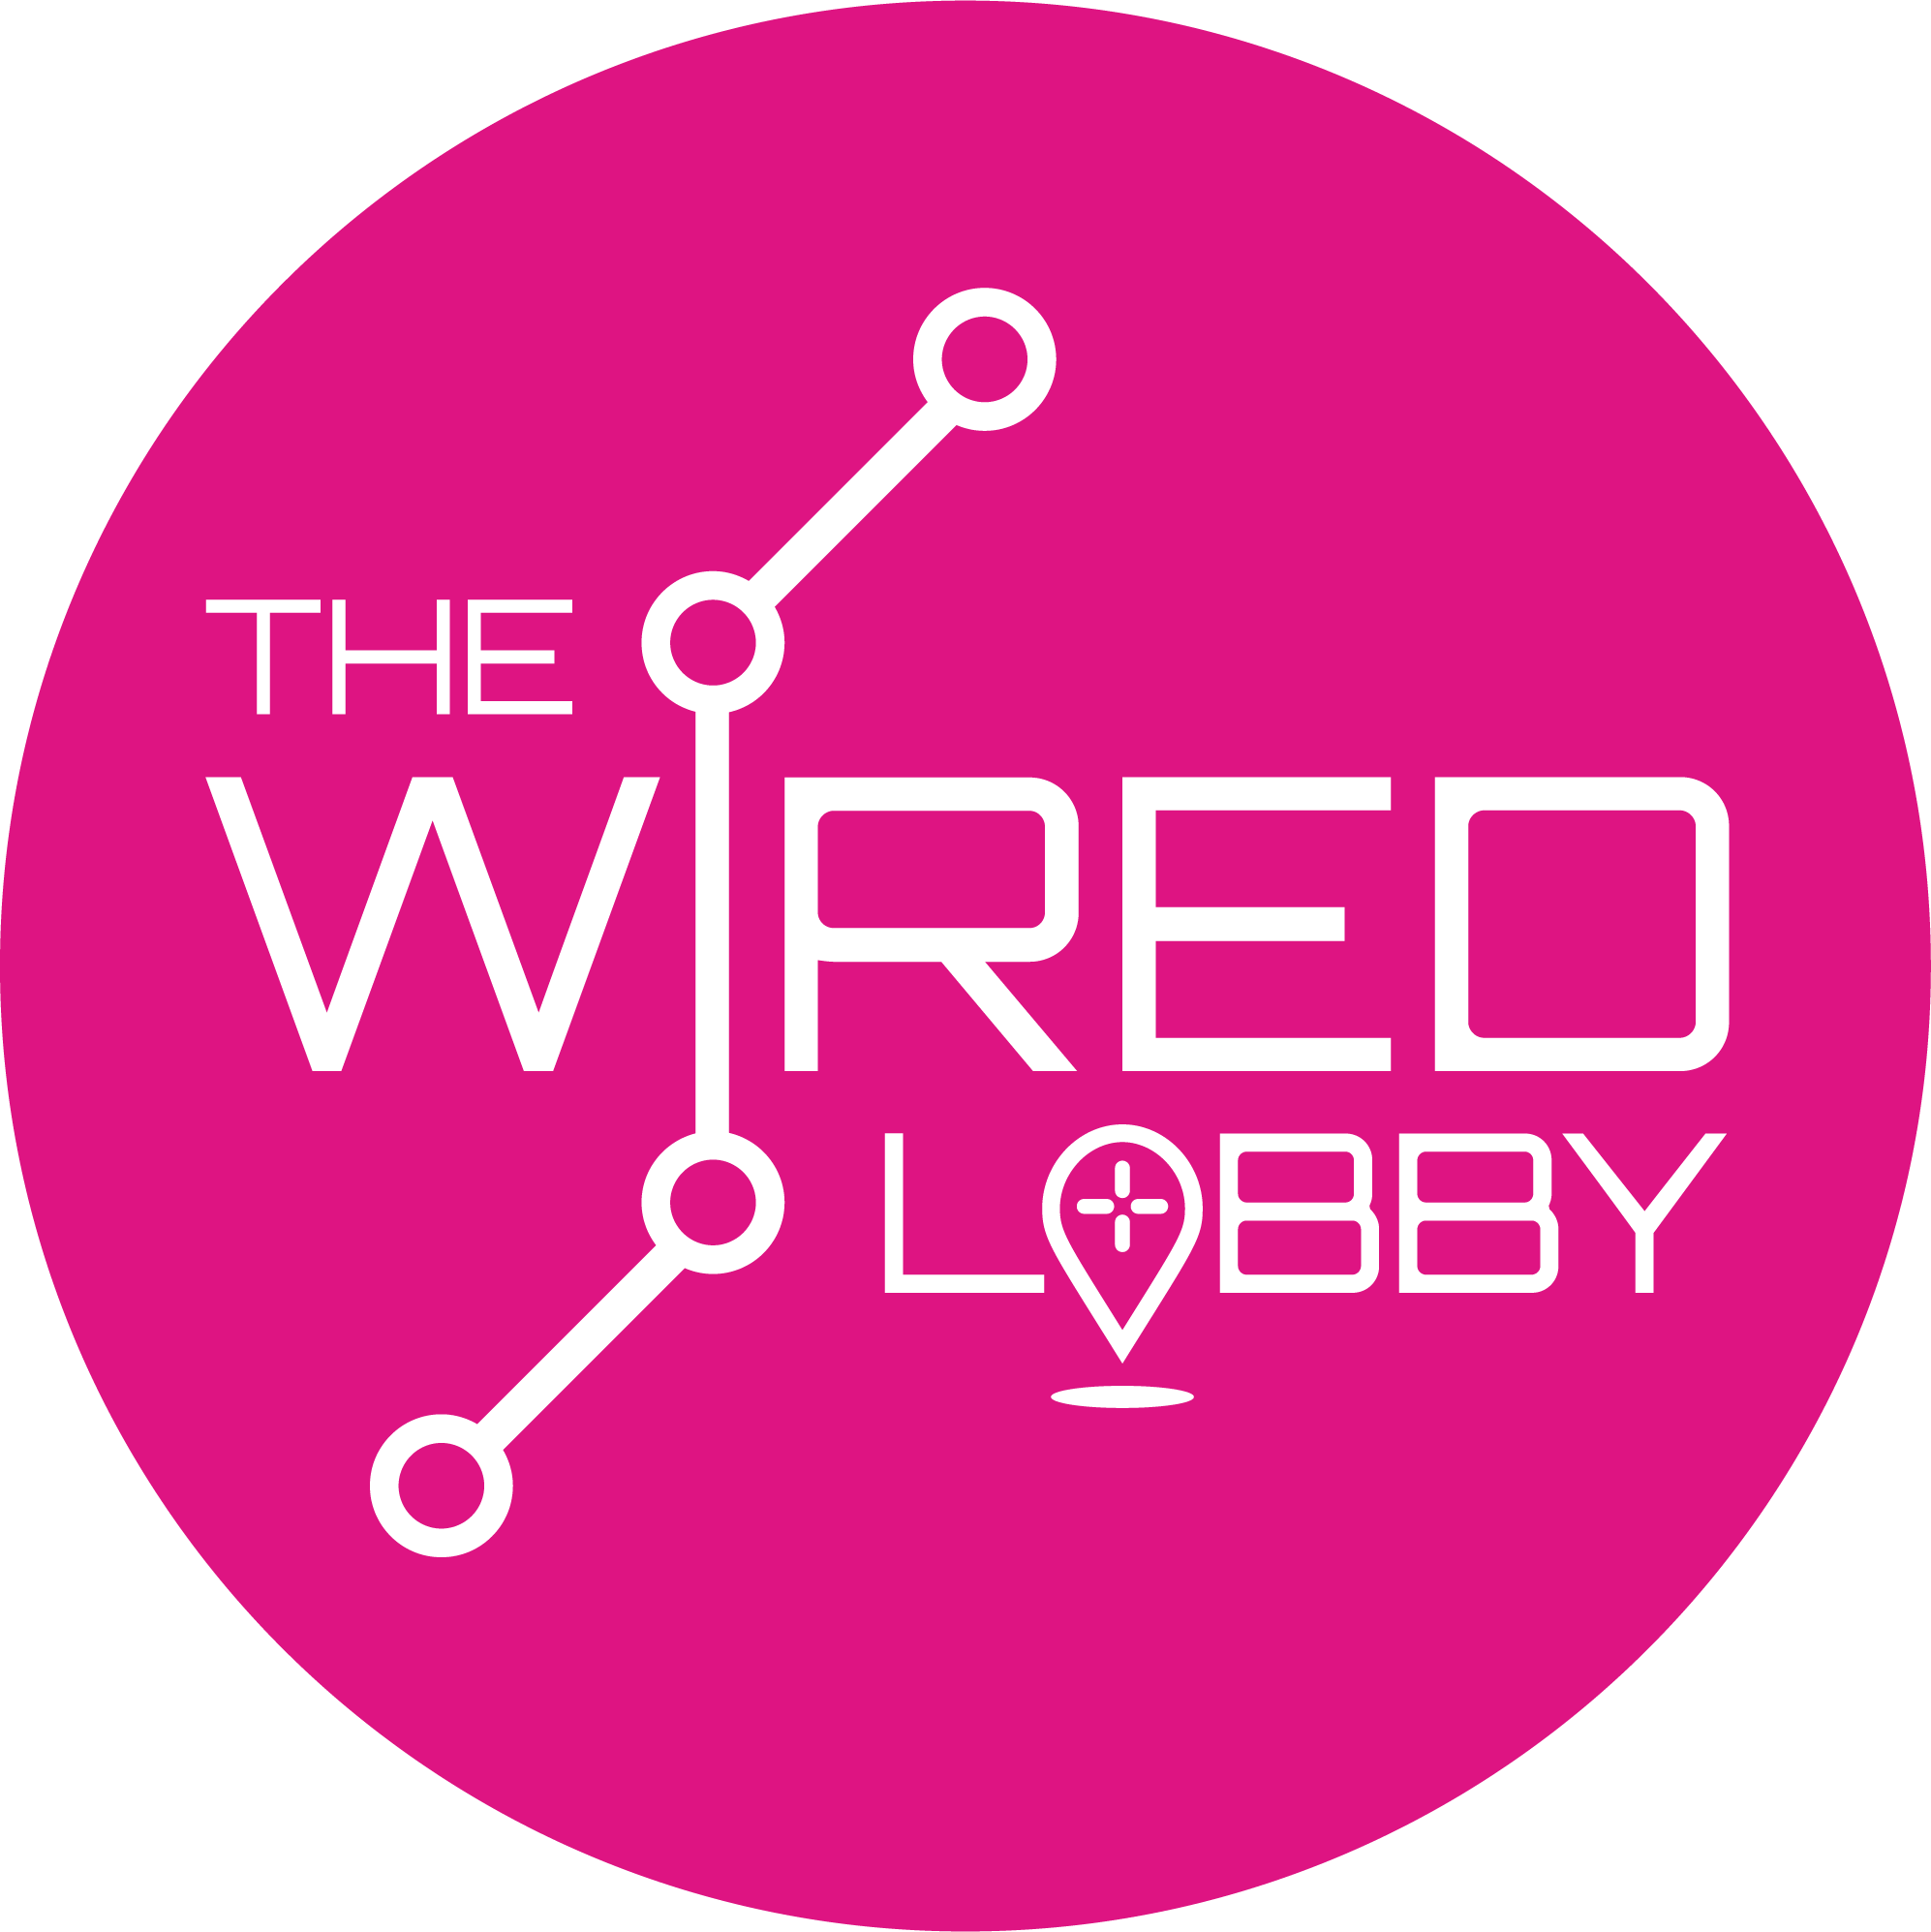 The Wired Lobby